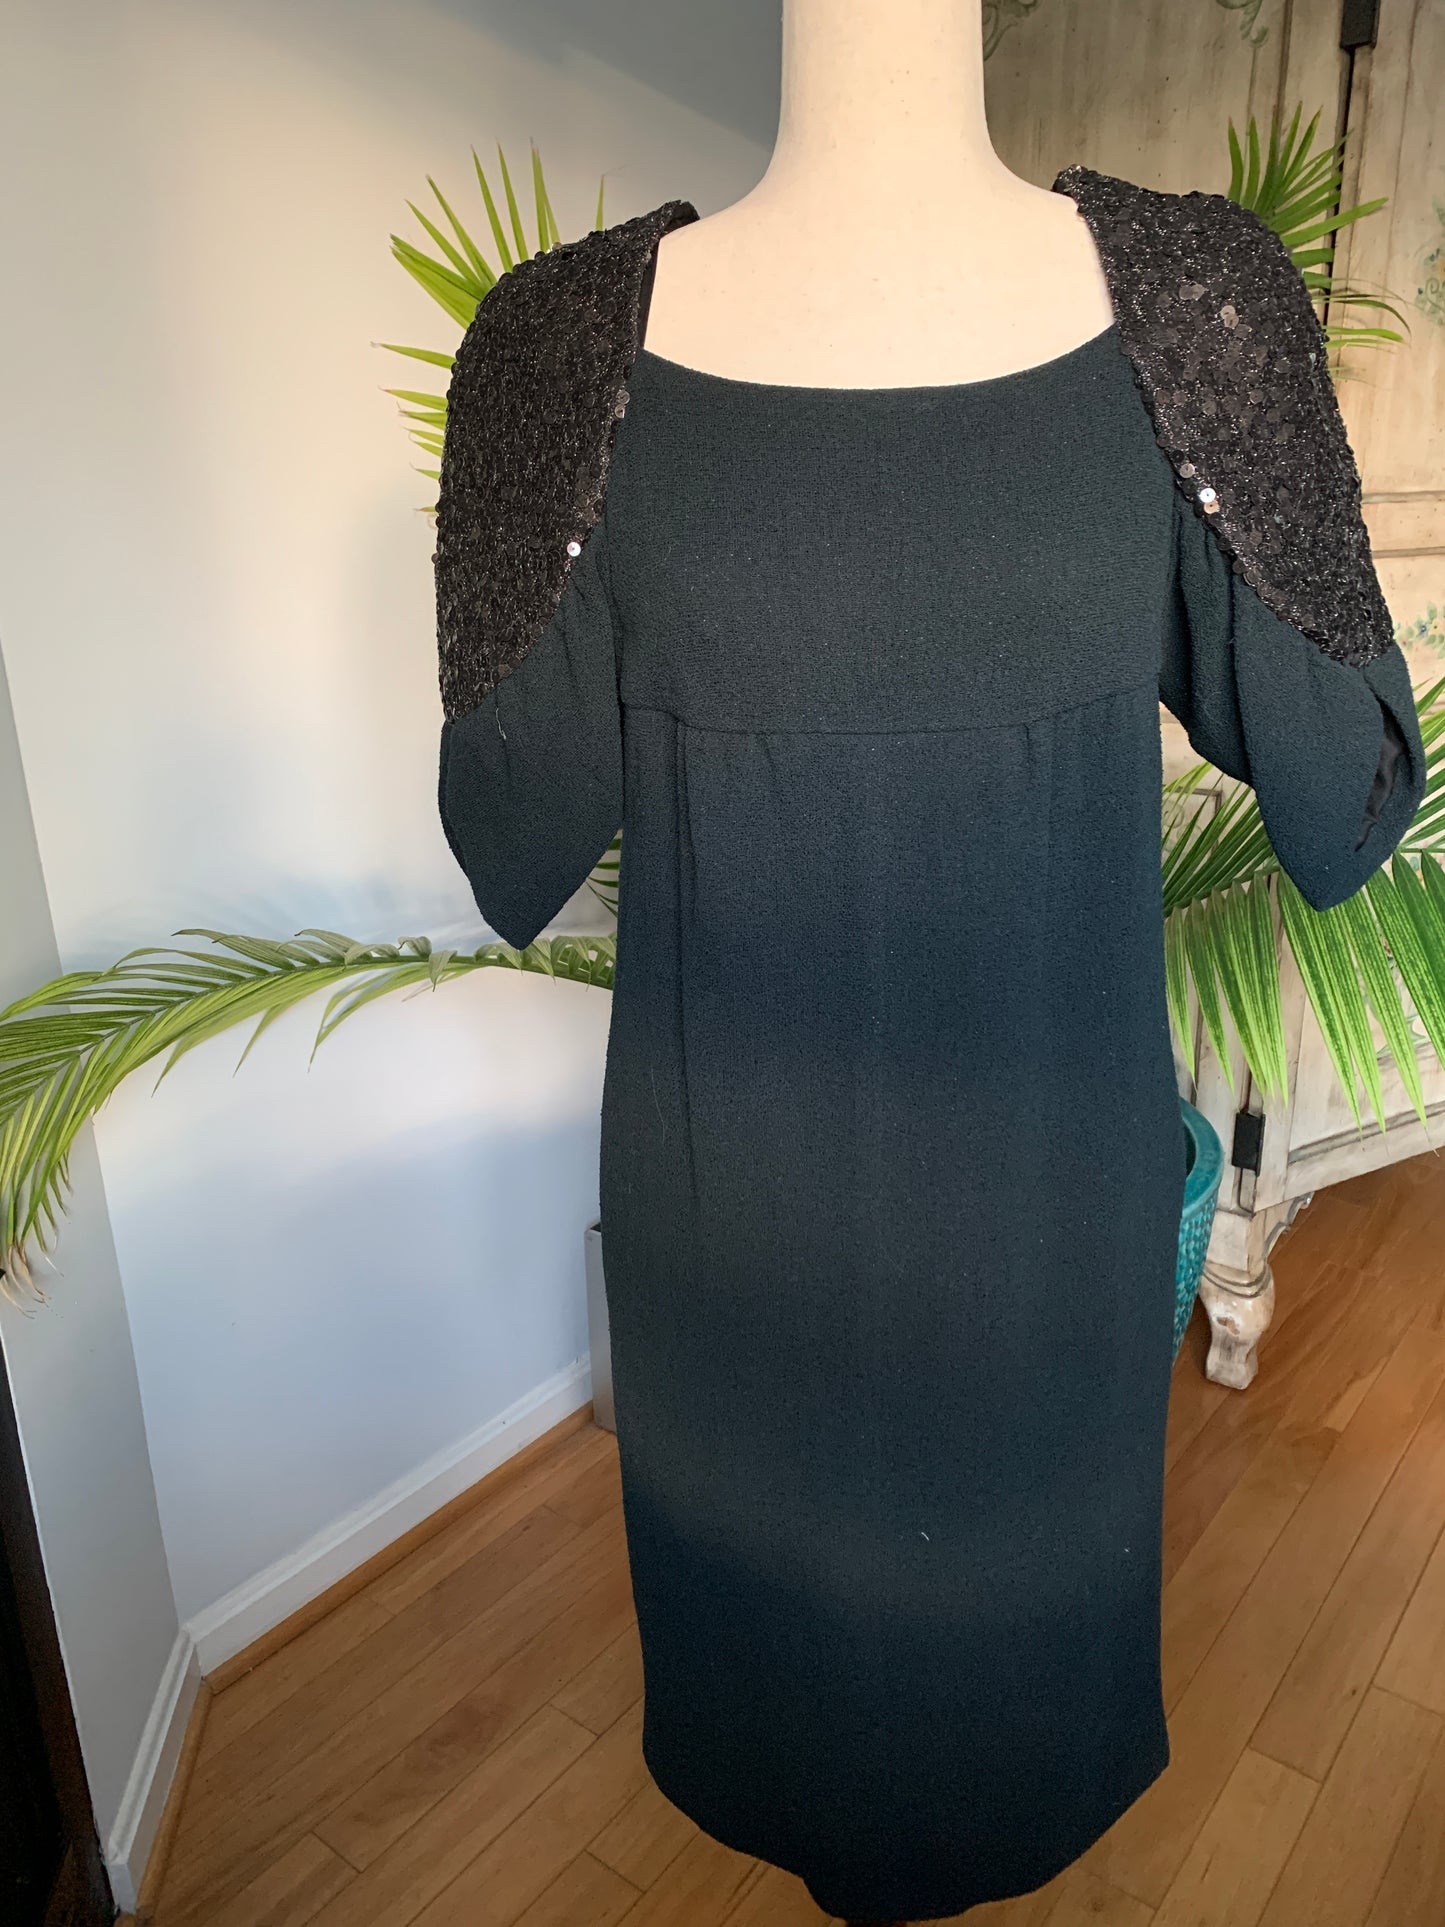 Chanel Black Wool Dress, Sequined sleeves, Size 40